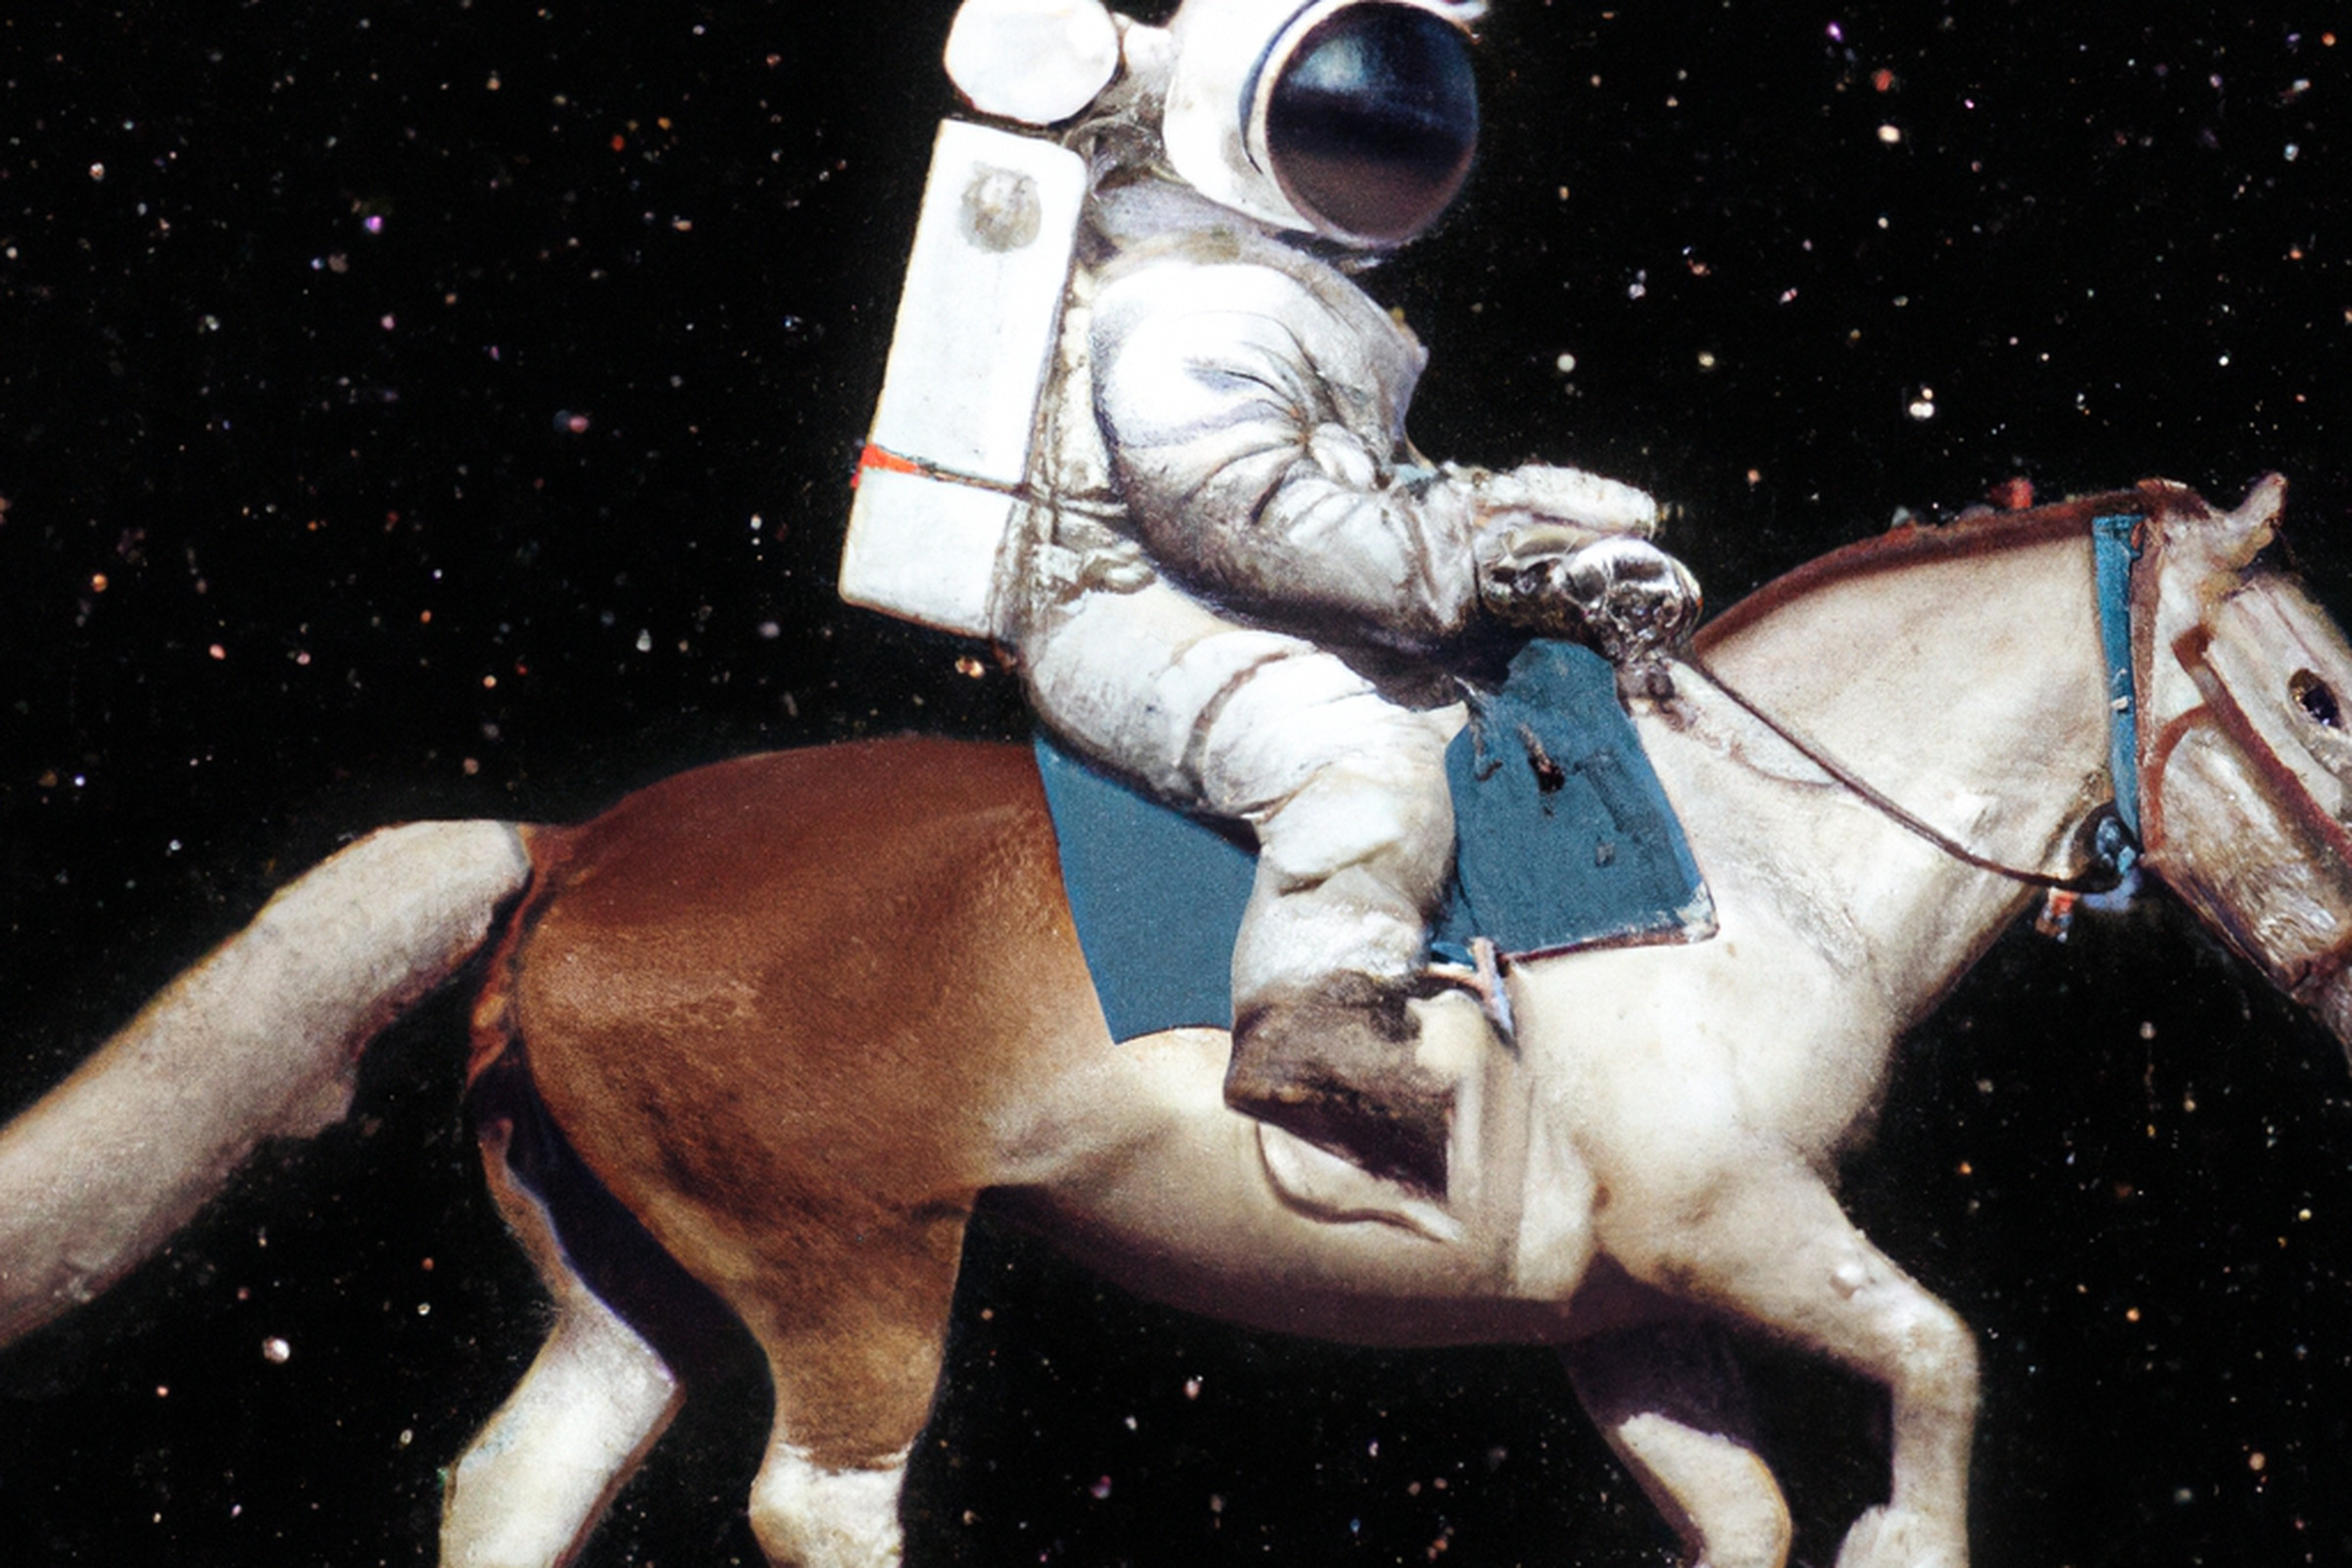 A DALL-E 2 result for “a photo of an astronaut riding a horse.”